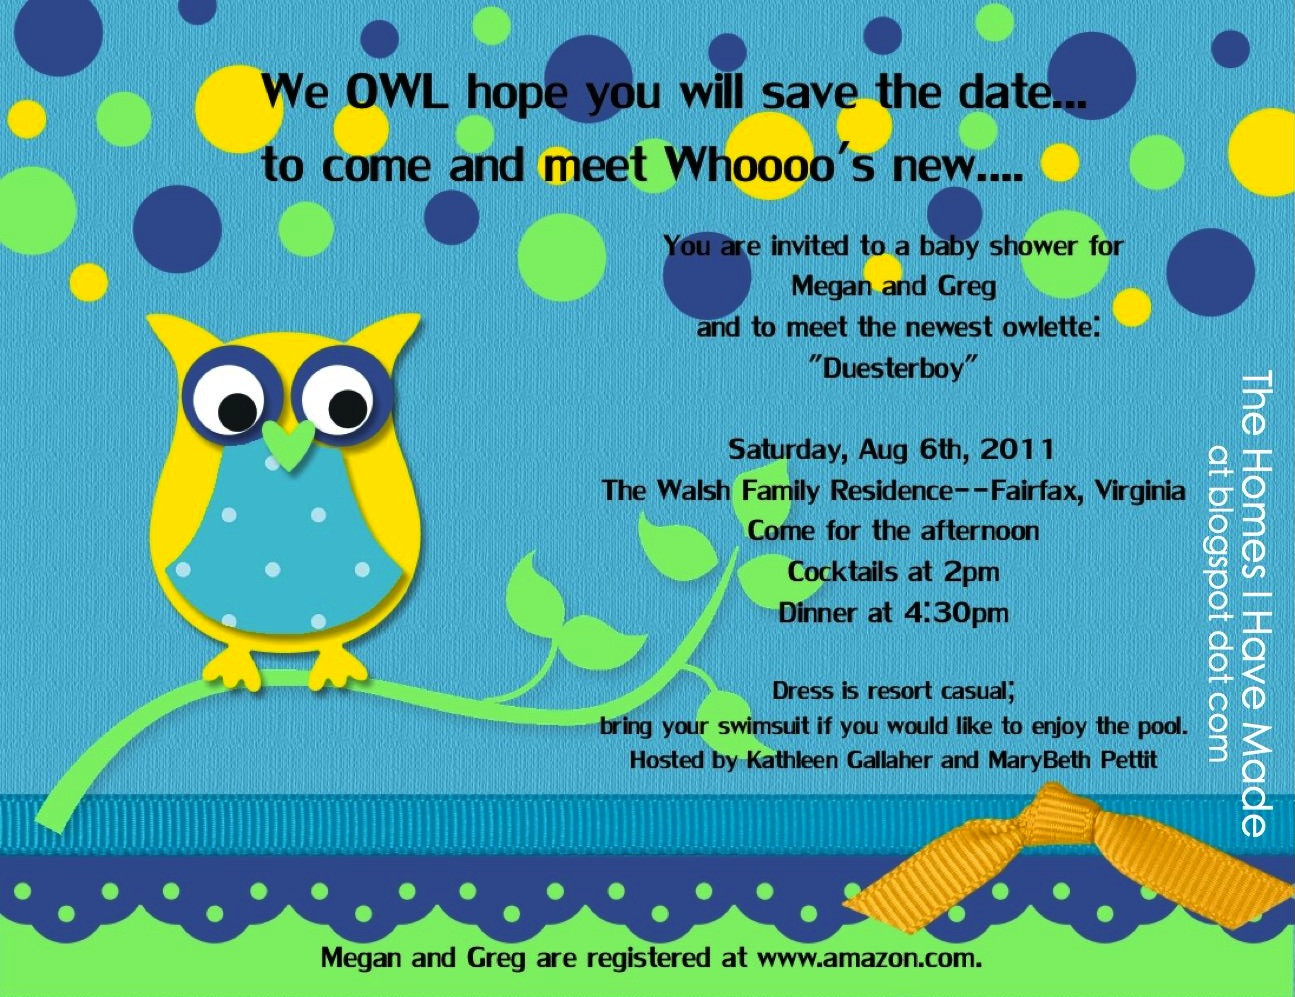 Meet The Baby Party Ideas
 Owl Themed Baby Meet & Greet